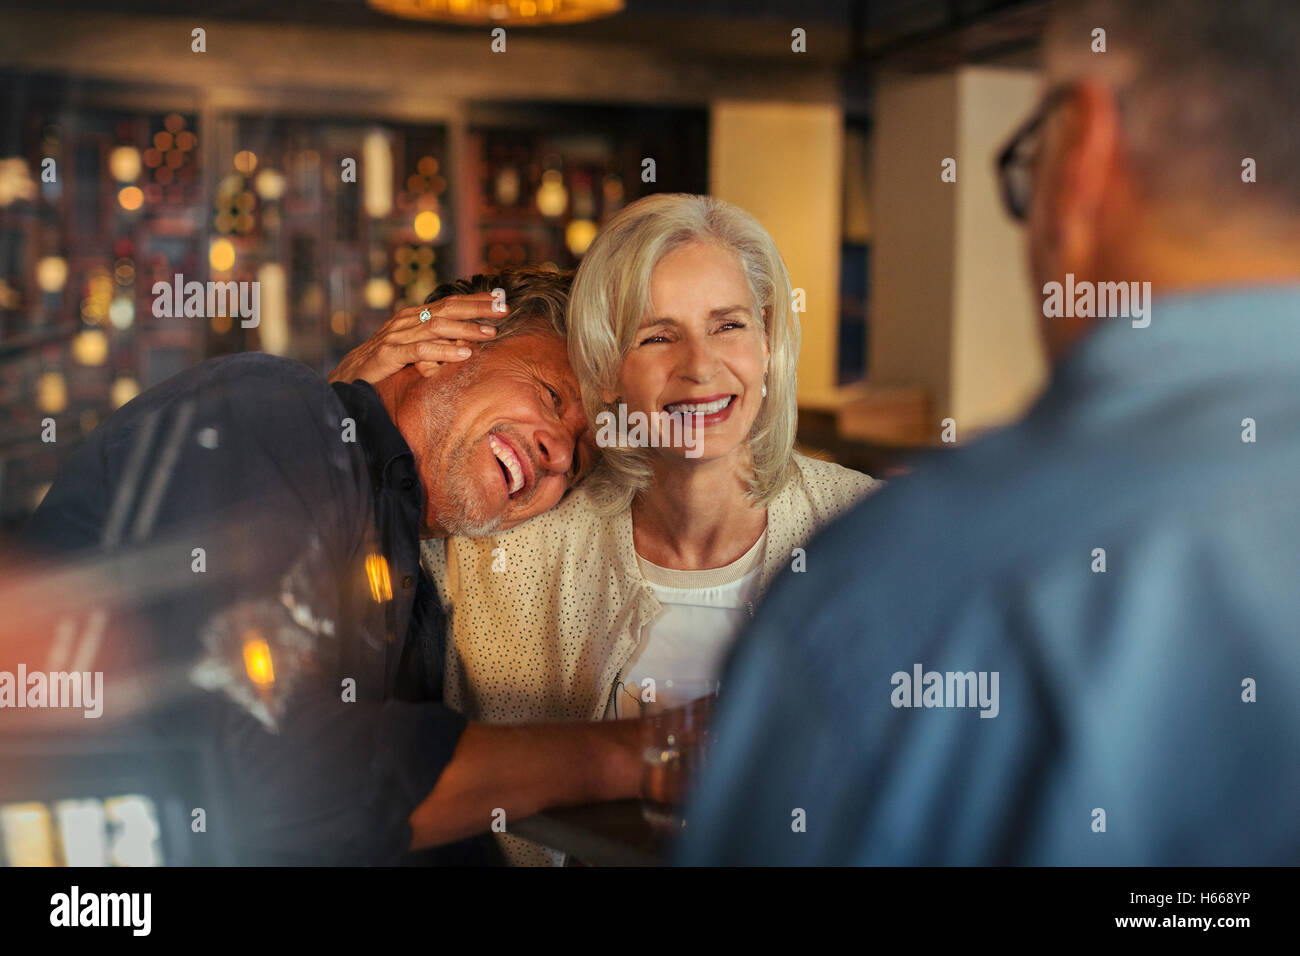 Affectionate senior couple laughing and hugging in bar Stock Photo